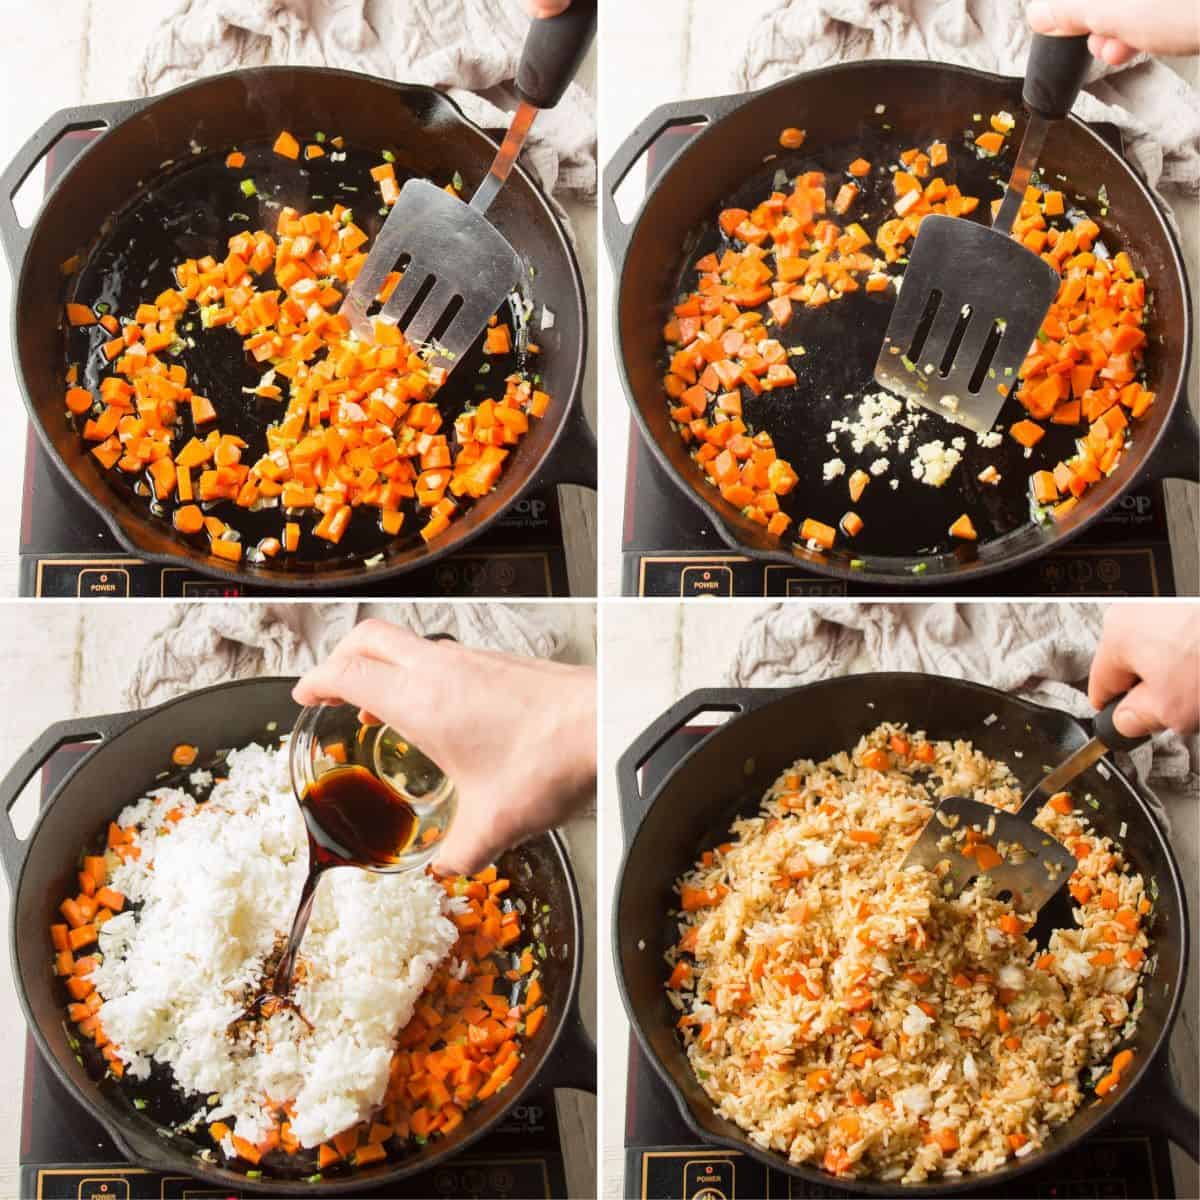 Collage Showing First 4 Steps for Making Vegan Fried Rice: Cook Carrots and Scallions, Add Garlic, Add Rice and Sauces, and Stir-Fry